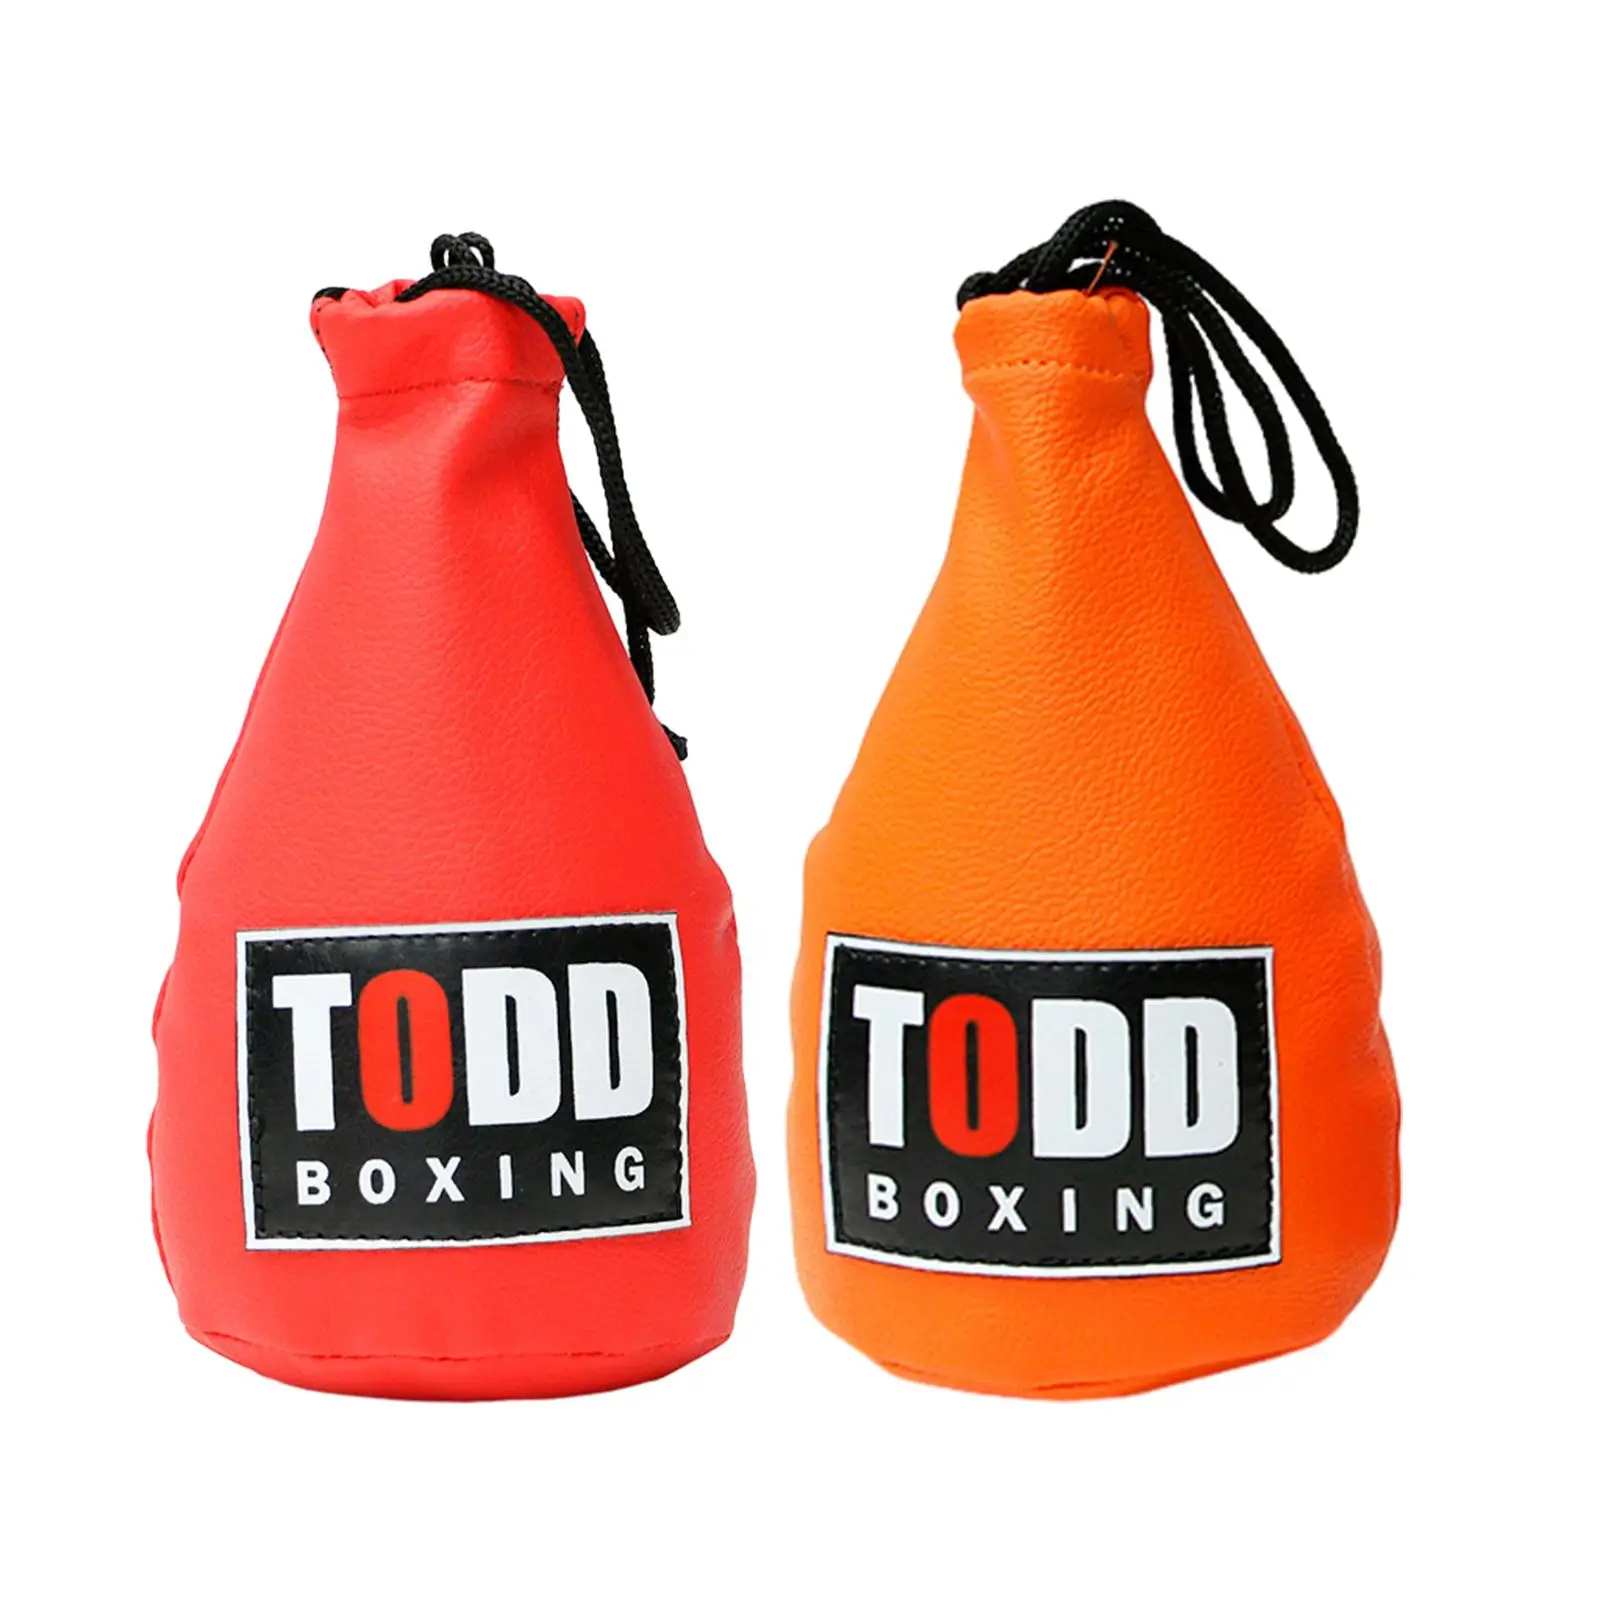 Boxing Punch Bag Reaction Training Gear Boxing Dodge Training Bag for Agility Hand Eye Coordination Fight Skill Reaction Karate